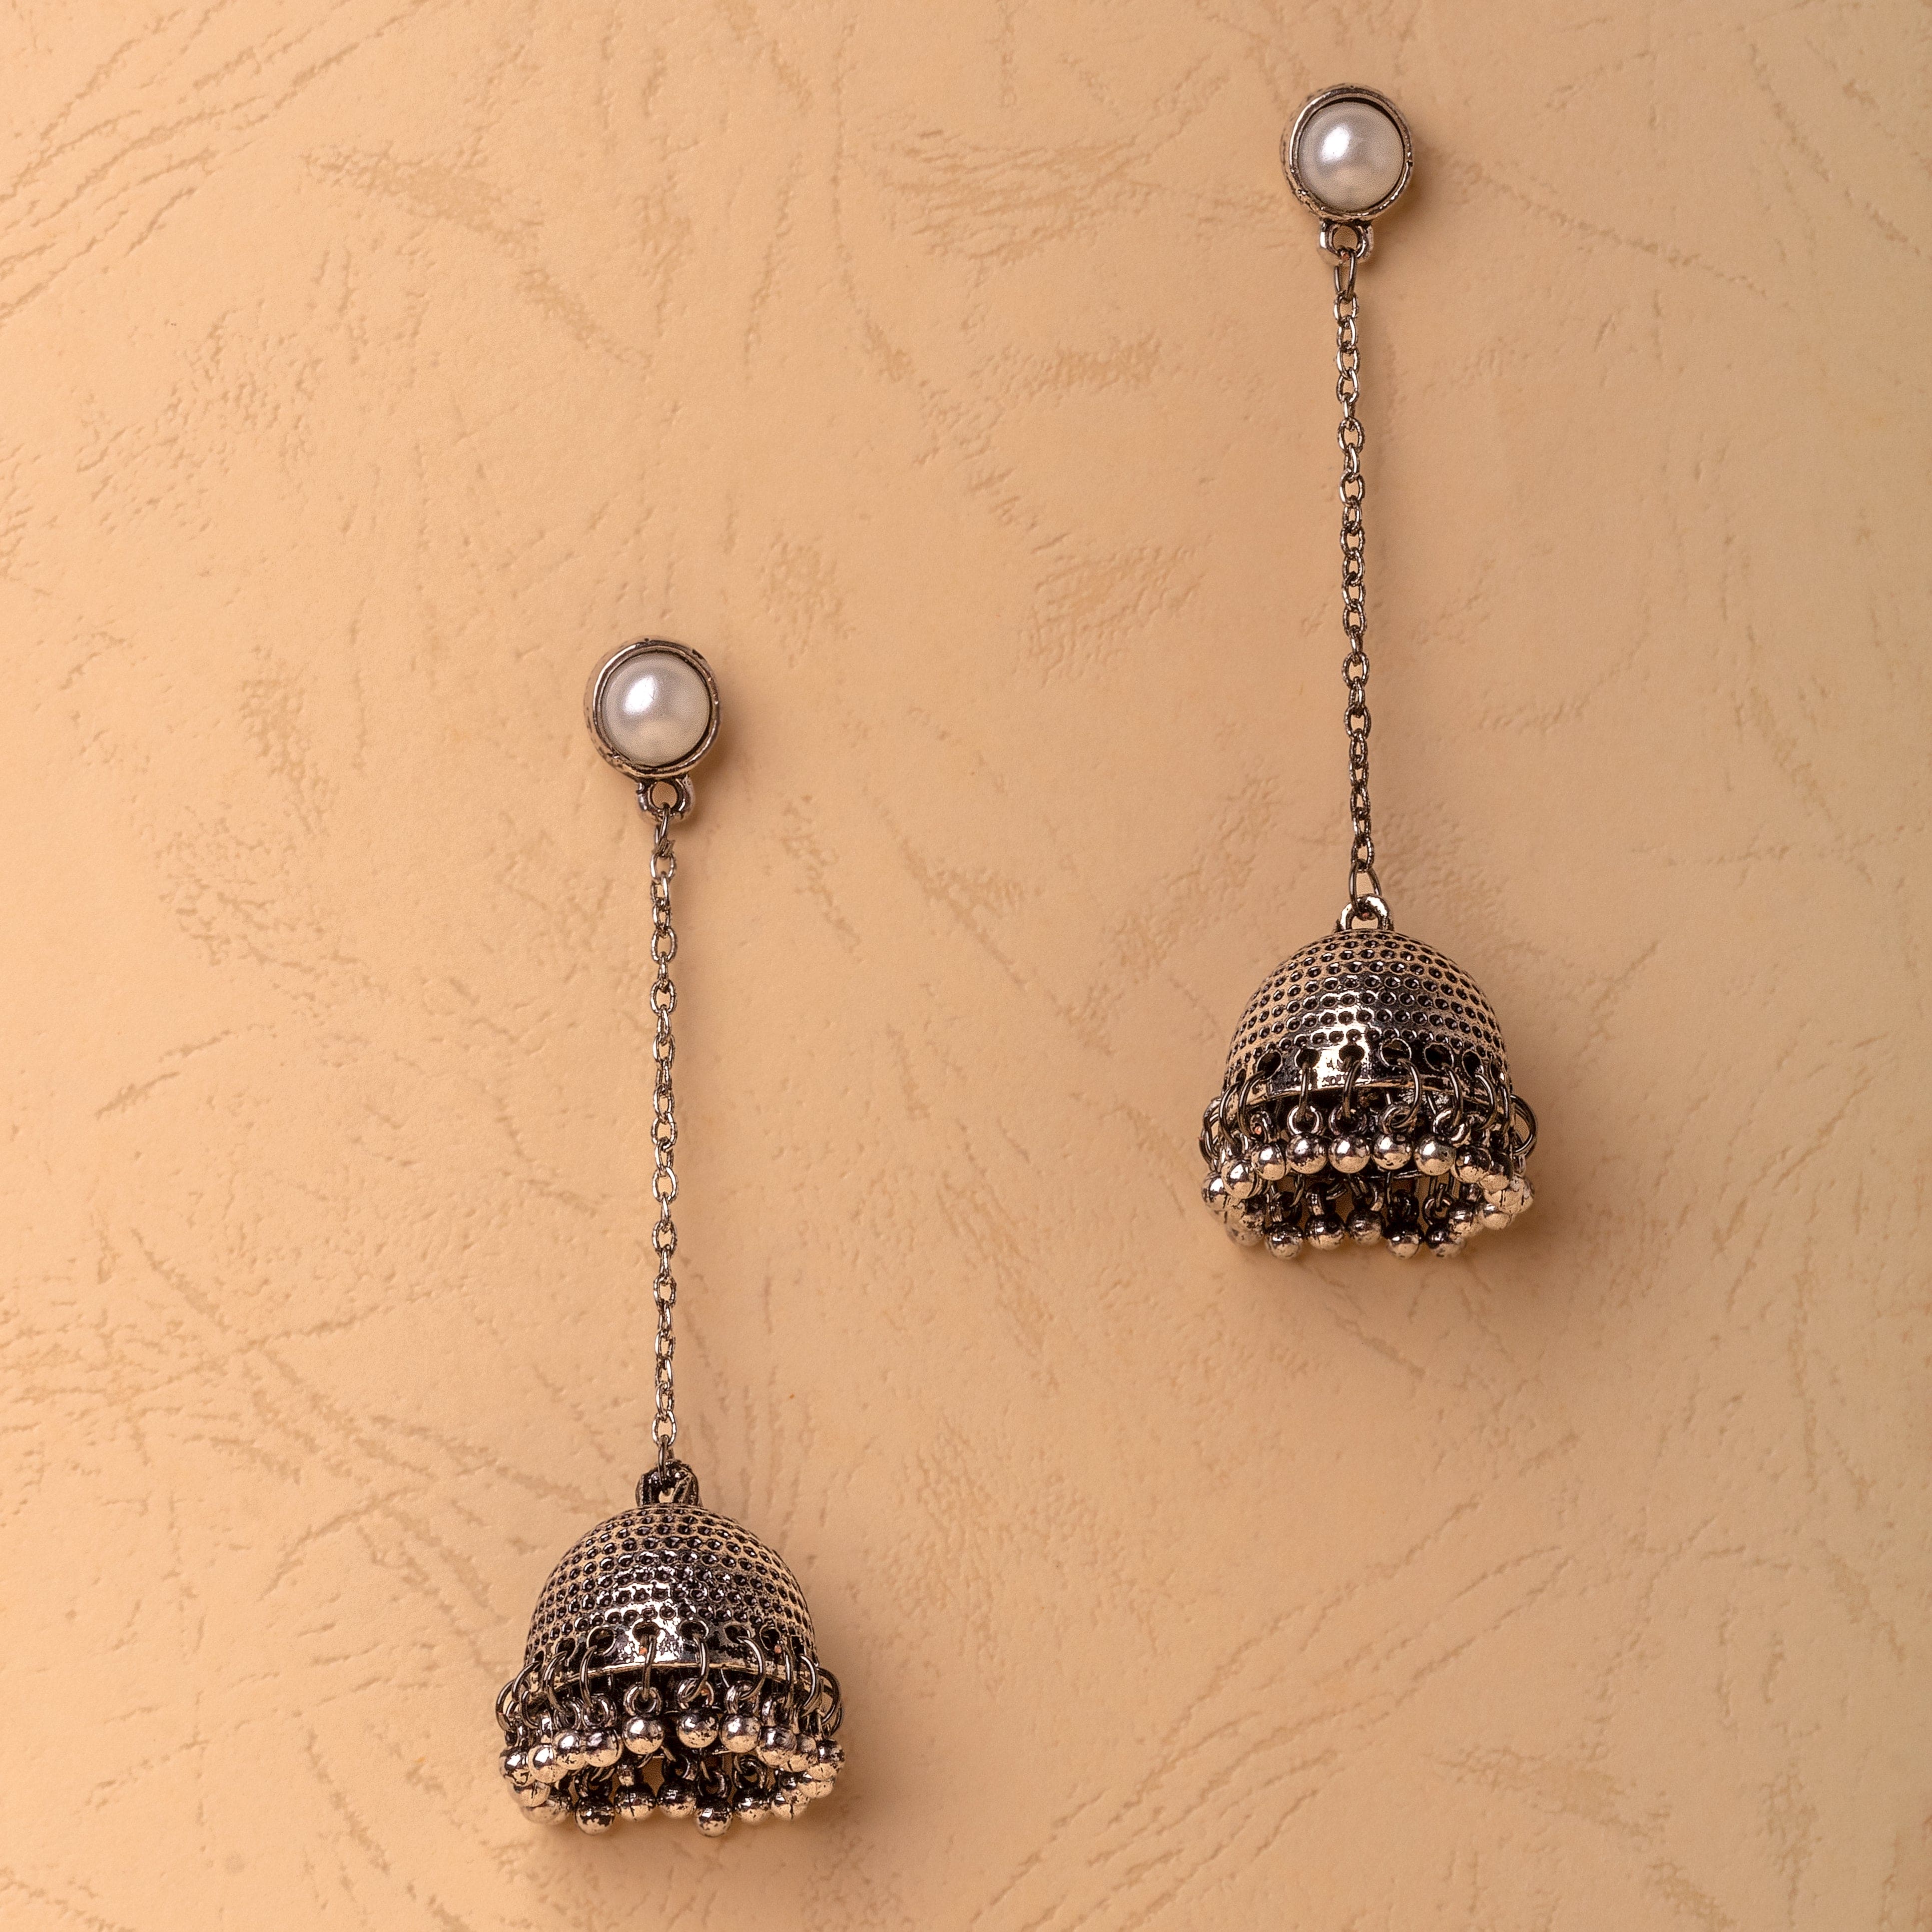 Oxidized Silver Plated Hook Drop Jhumka Jhumki Party Wear Indian Earrings  Jewelry for Women, Free Shipping All Over World - Etsy